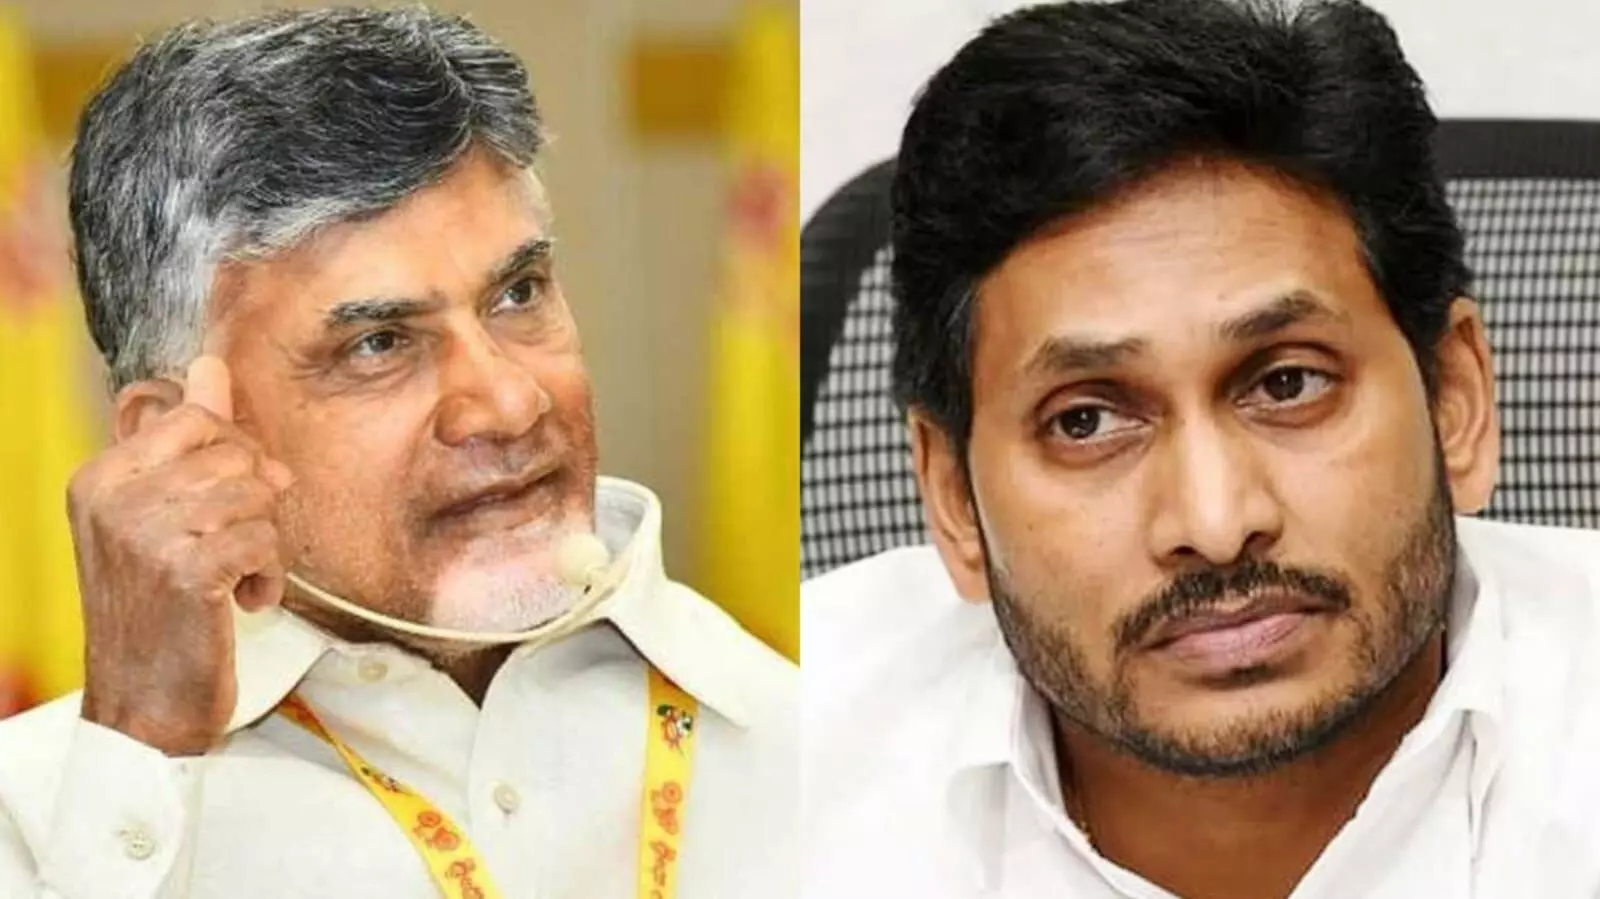 TDP wins MLC seat: Slap in face for Chief Minister Y S Jagan